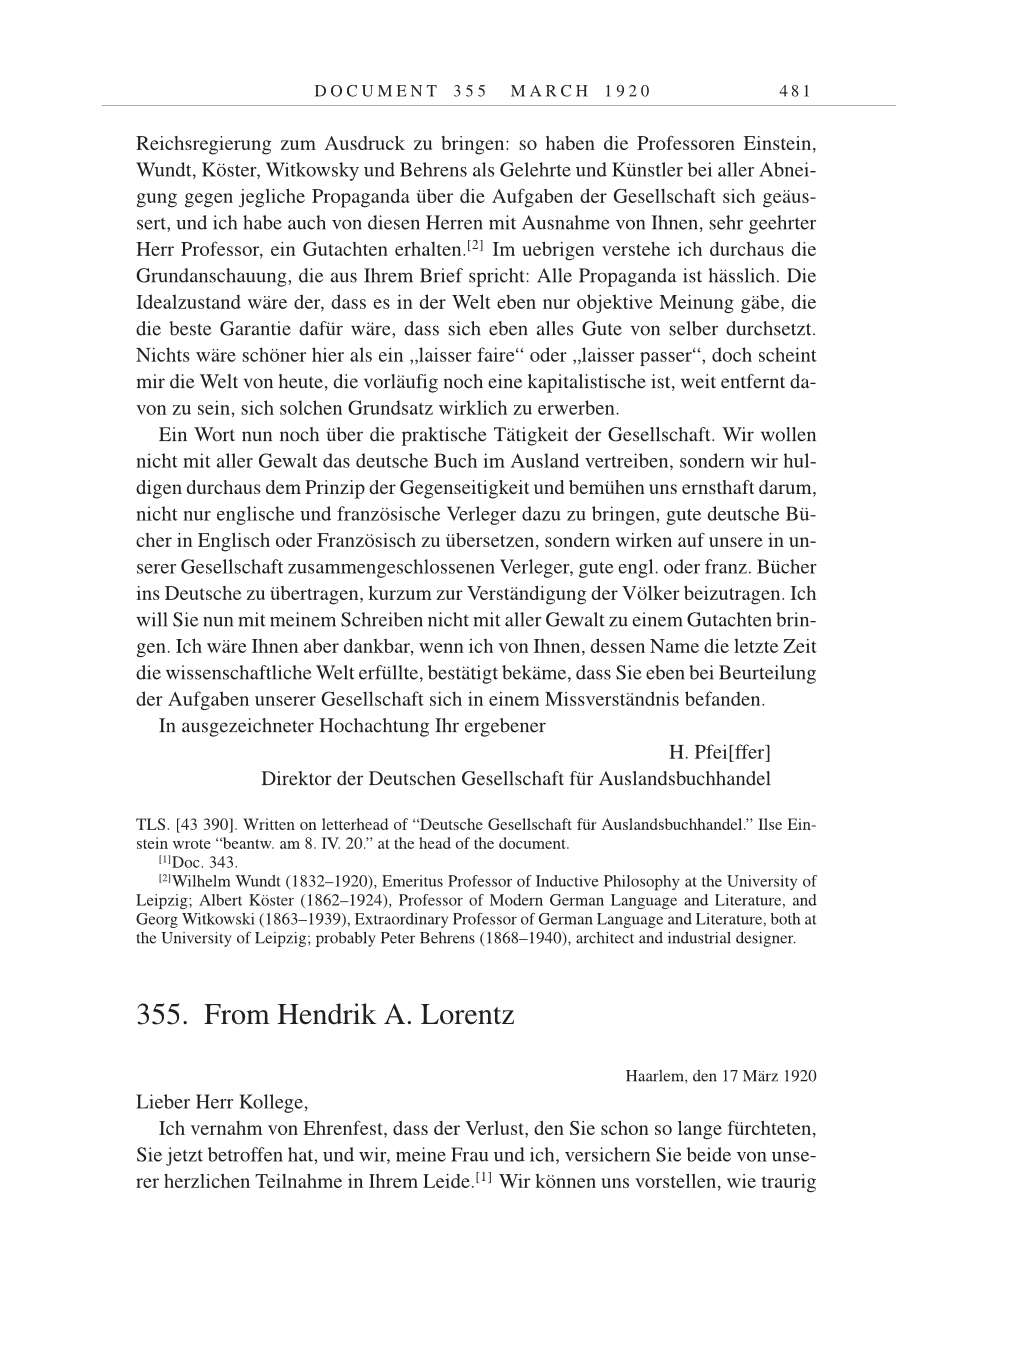 Volume 9: The Berlin Years: Correspondence January 1919-April 1920 page 481